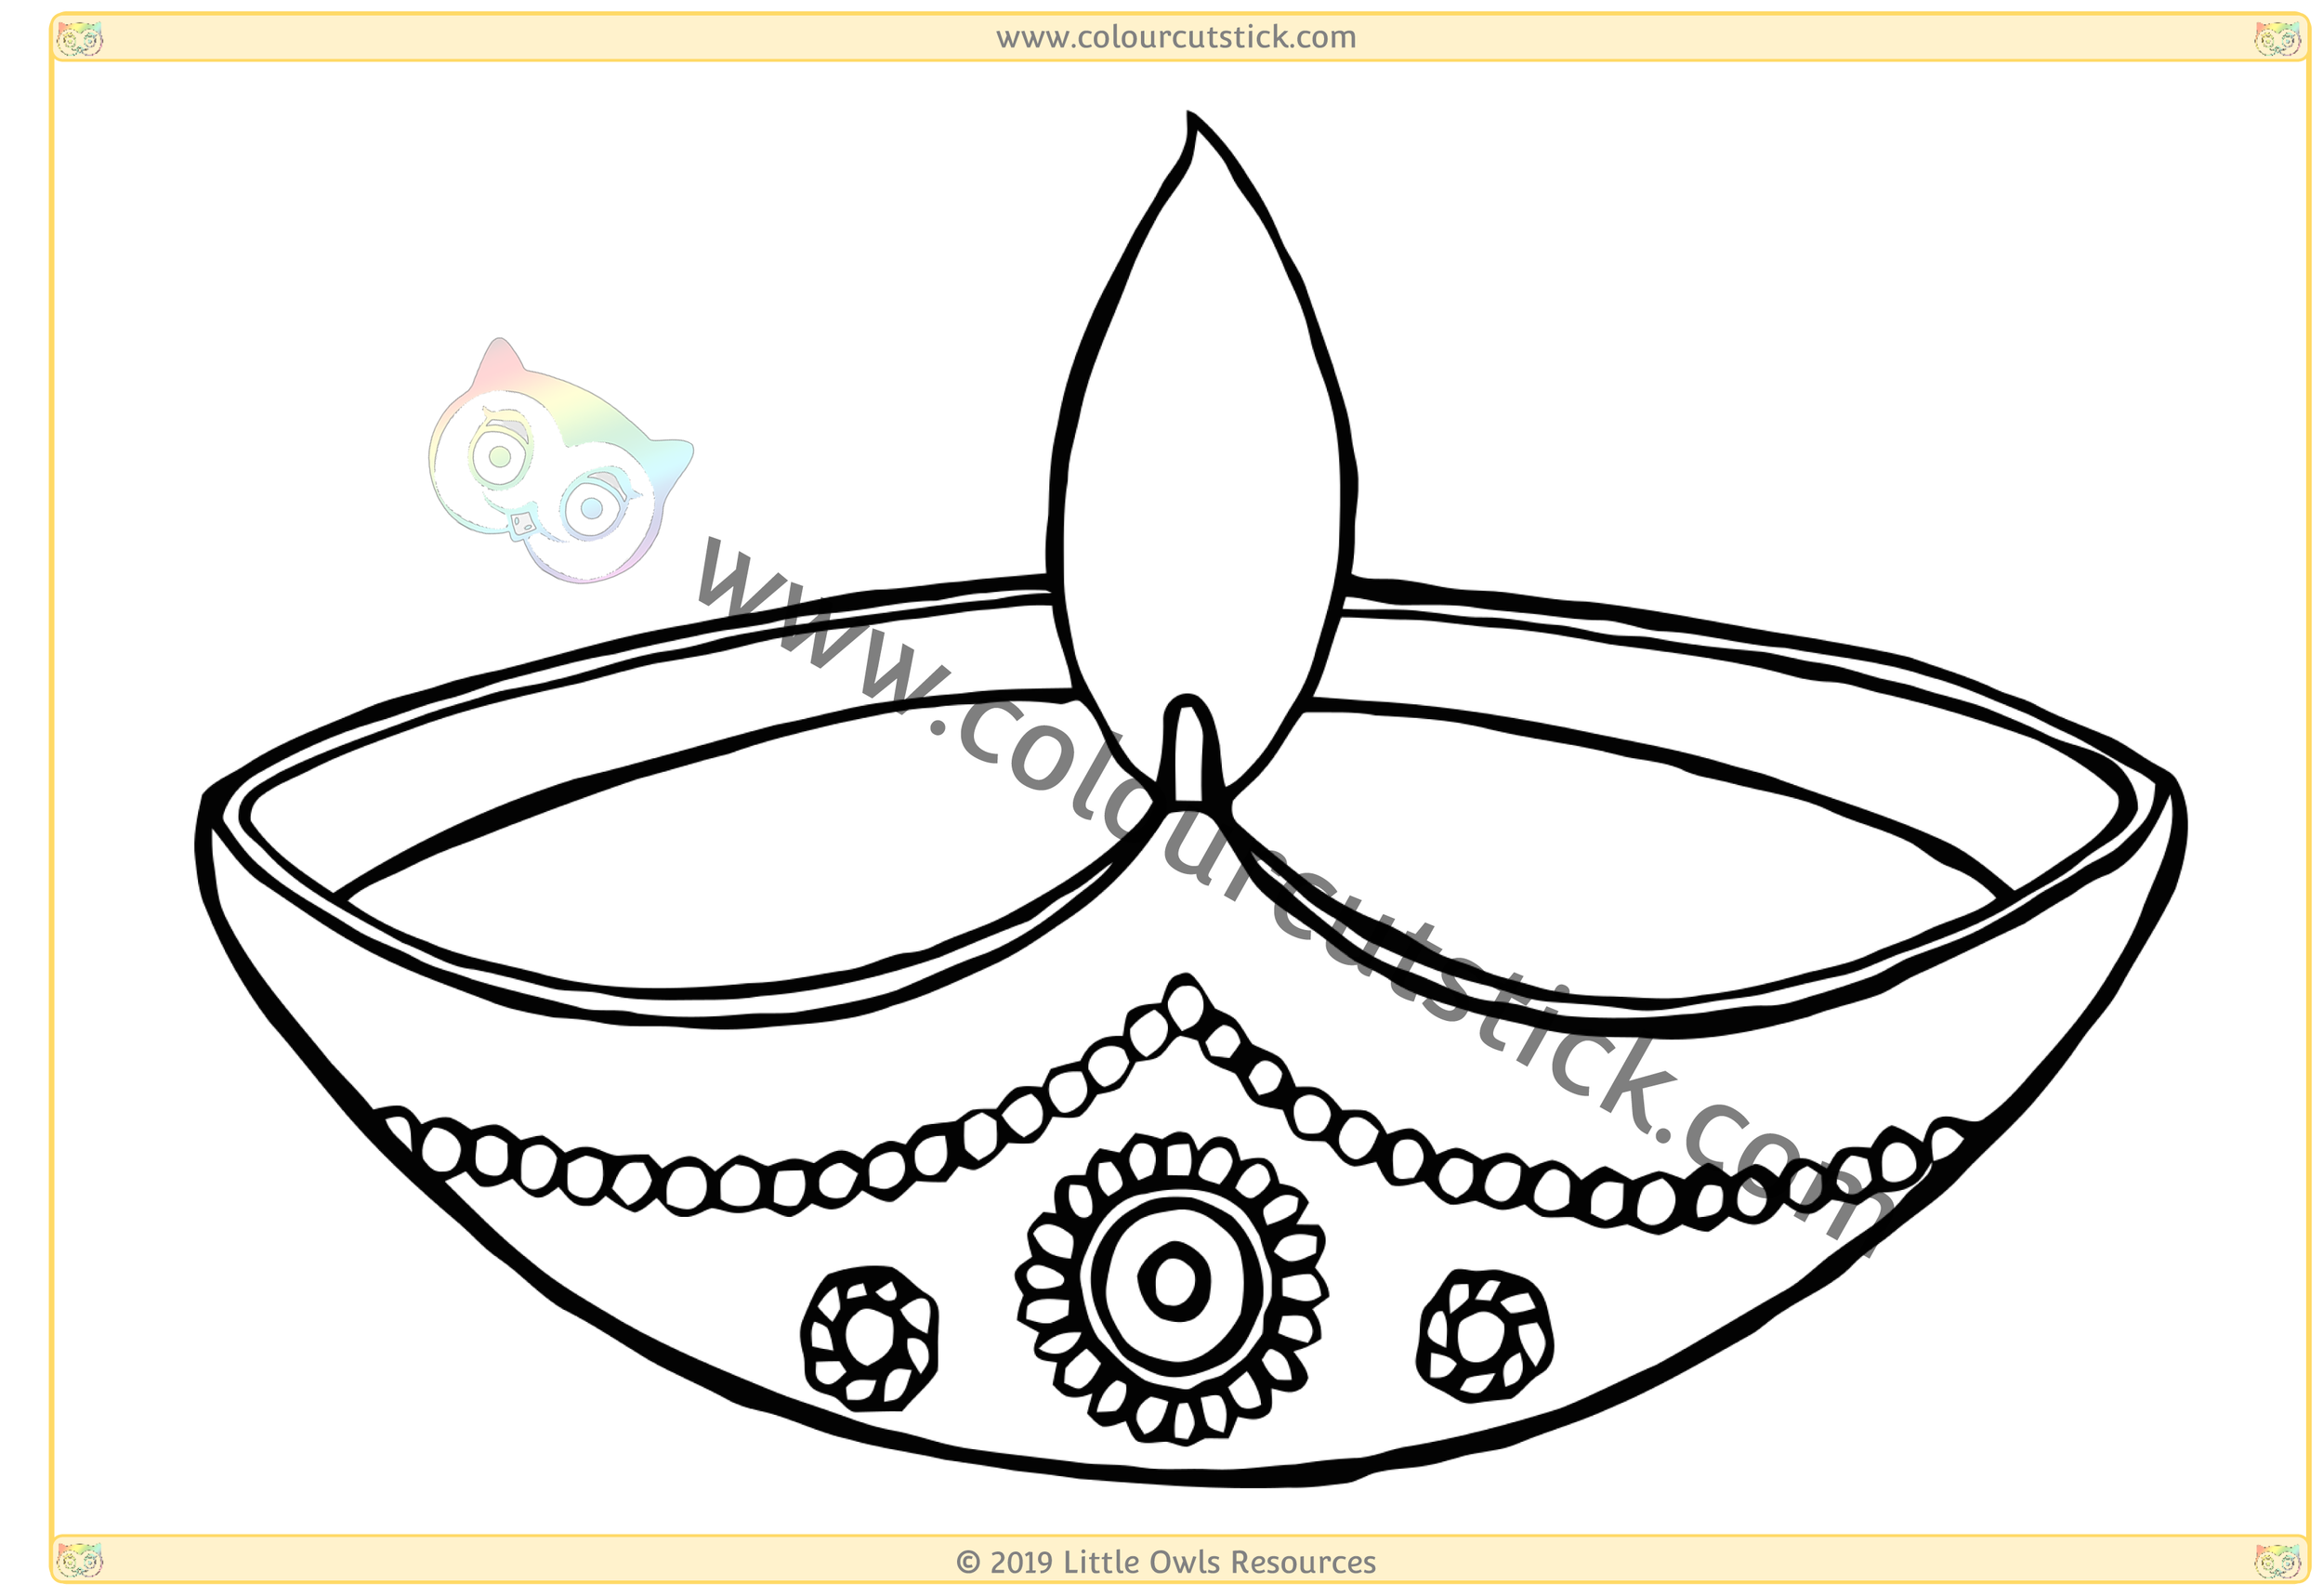 Free Diwali Colouring Coloring Pages For Children Kids Toddlers Preschoolers Early Years Colour Cut Stick Free Colouring Activities